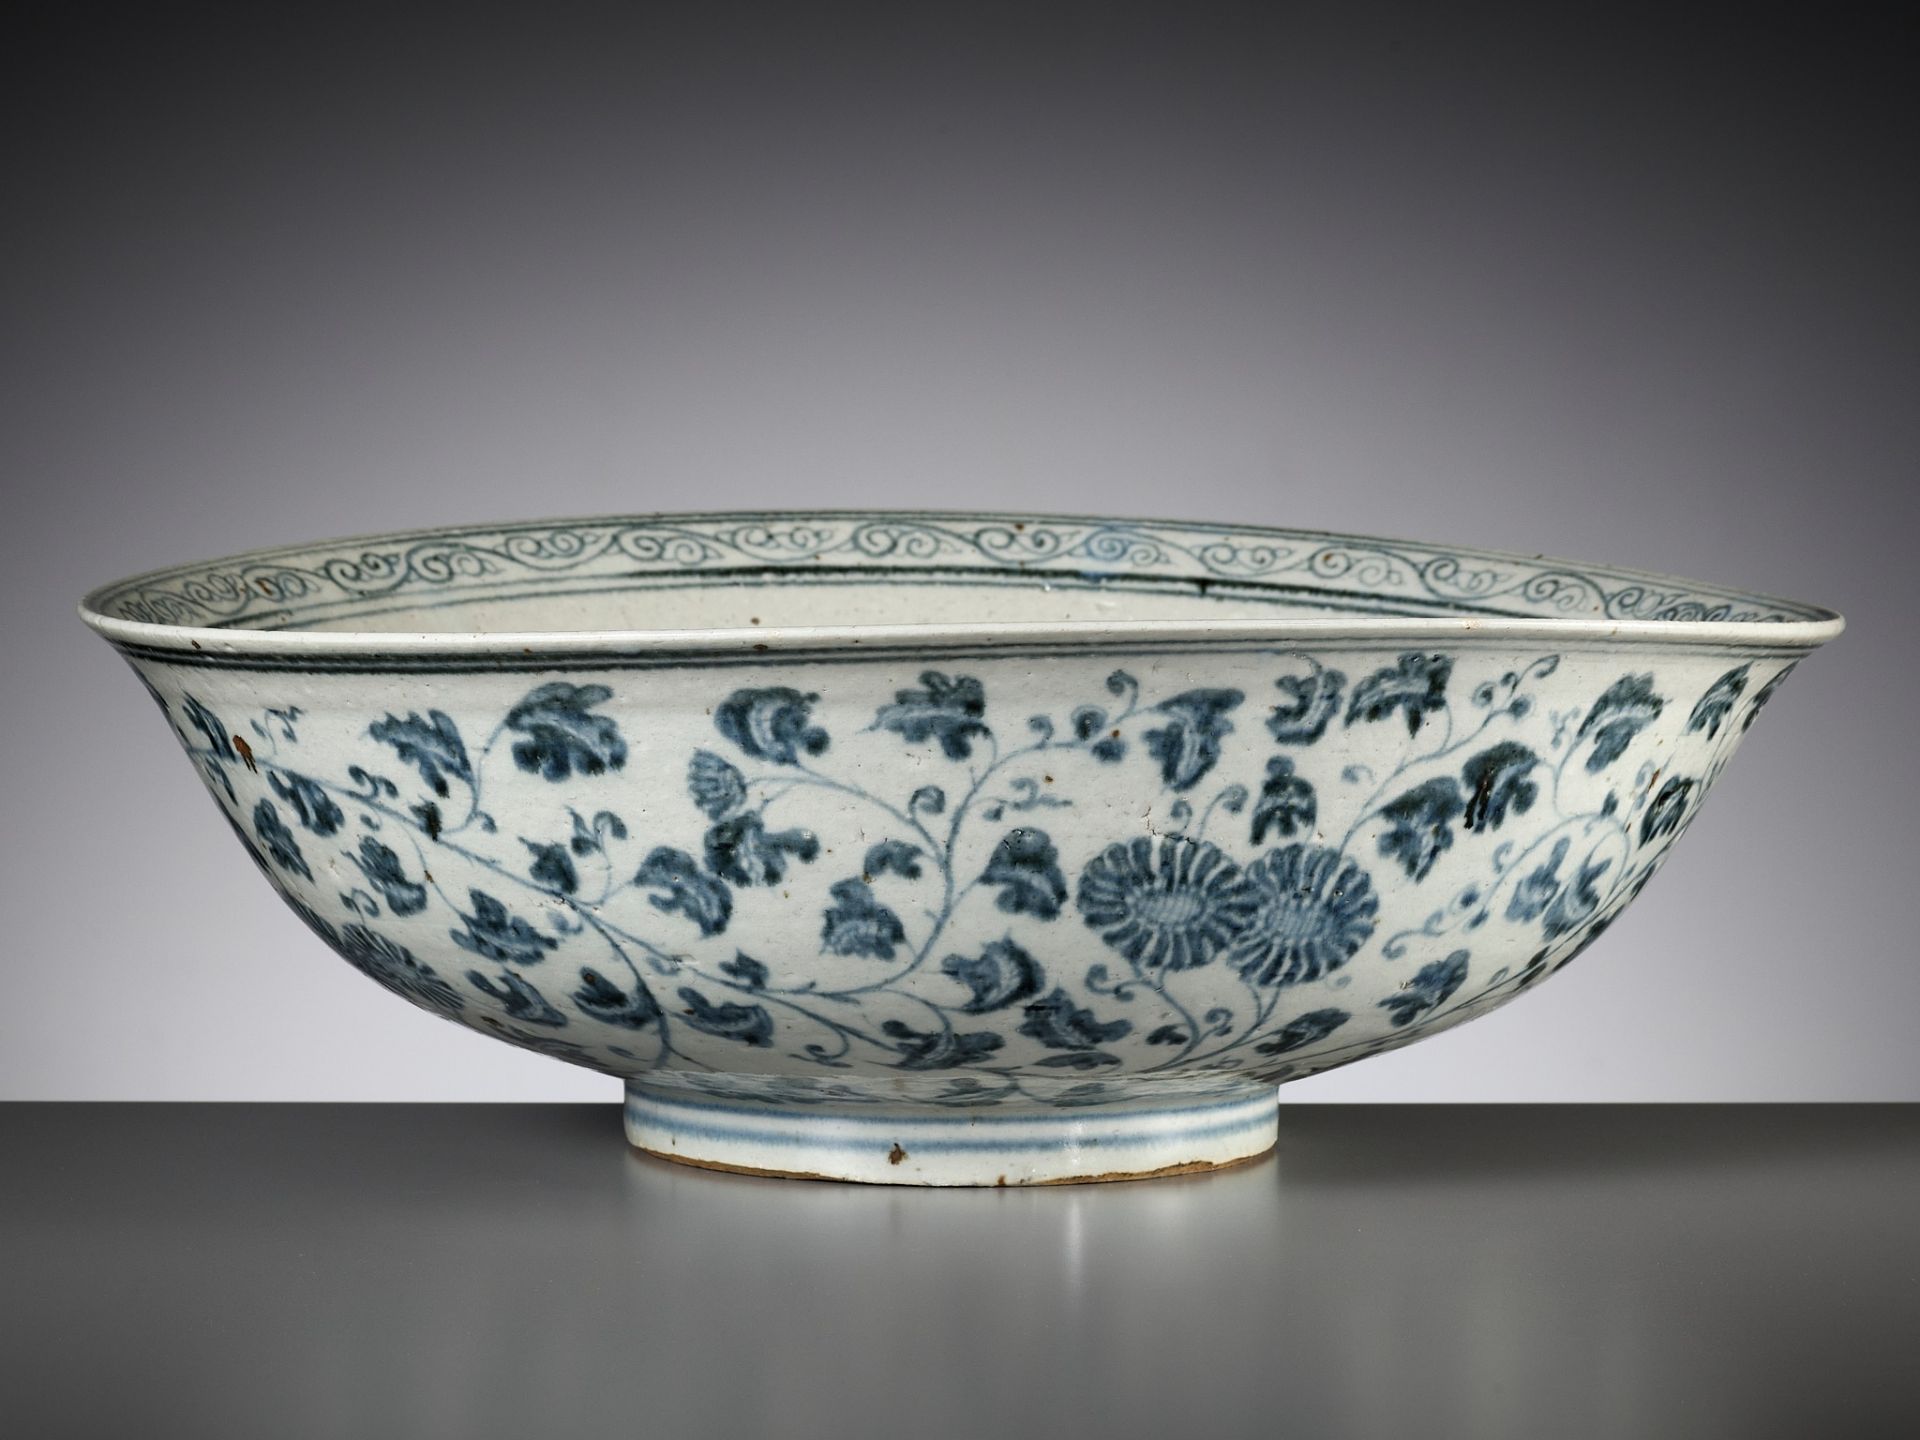 A LARGE ANNAMESE BLUE AND WHITE BOWL, VIETNAM, 14TH-15TH CENTURY